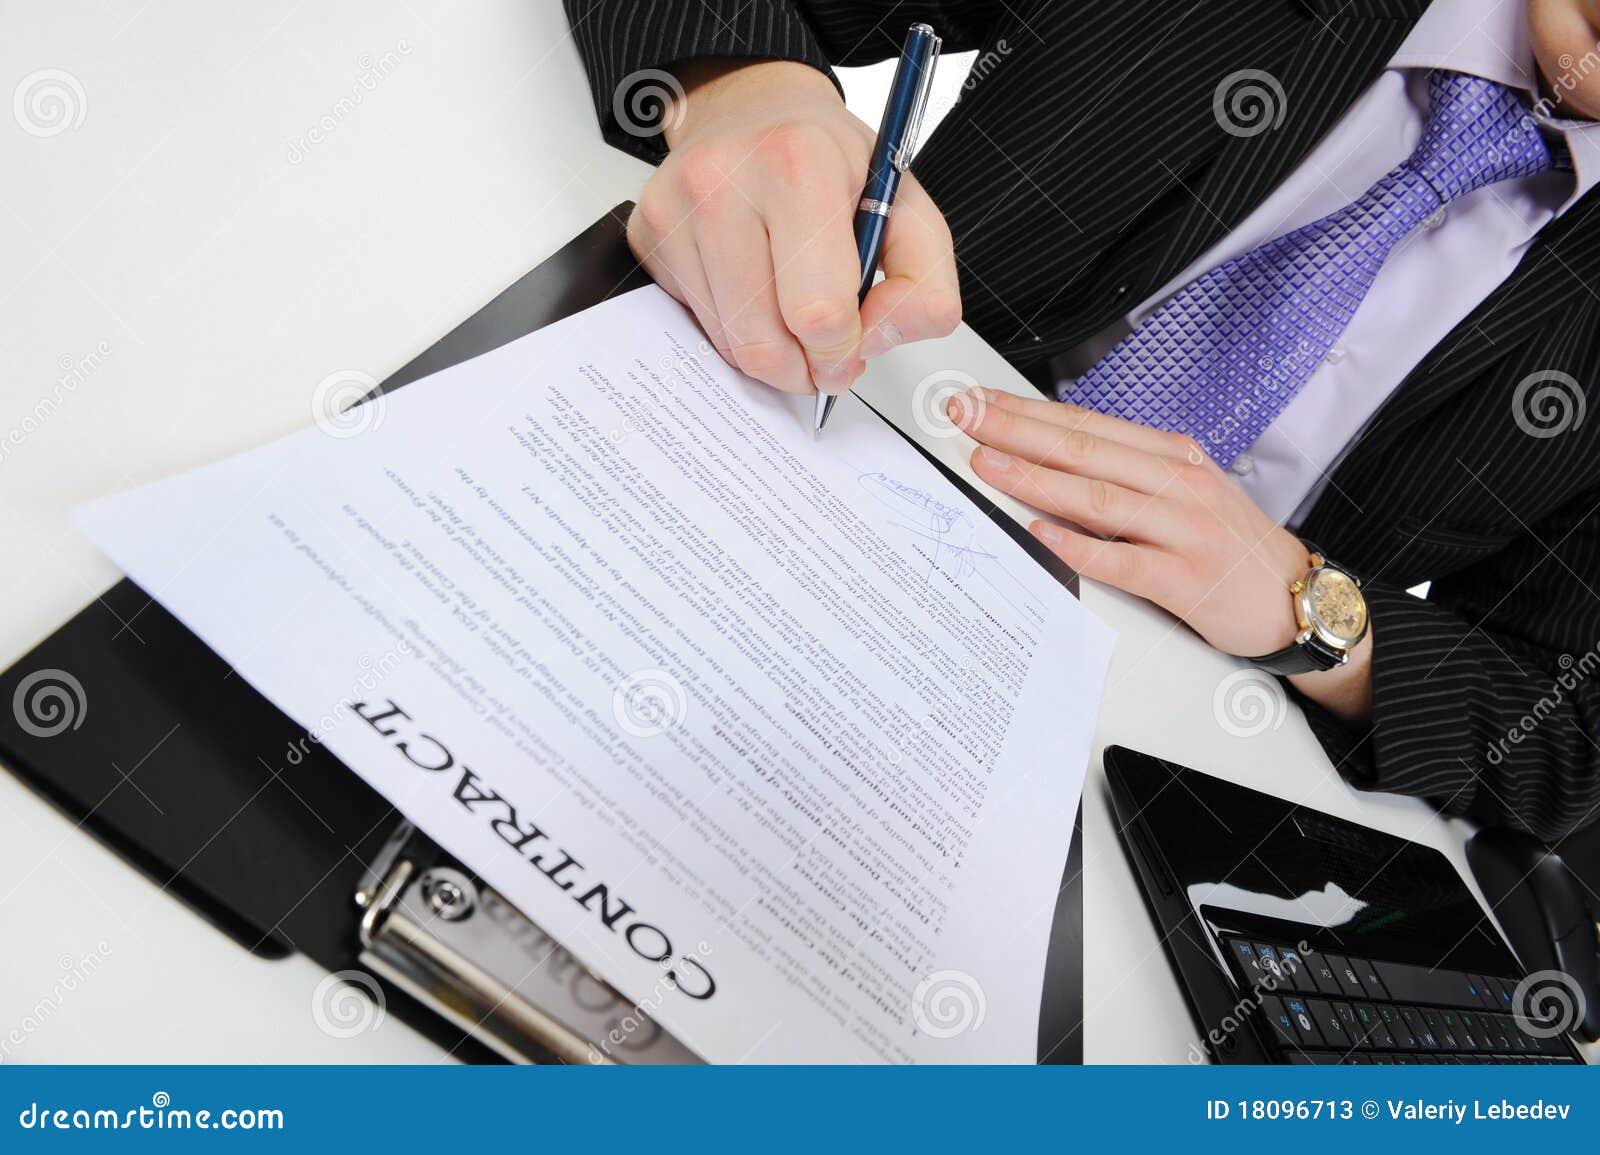 Businessman Signs a Contract Stock Image - Image of businessman